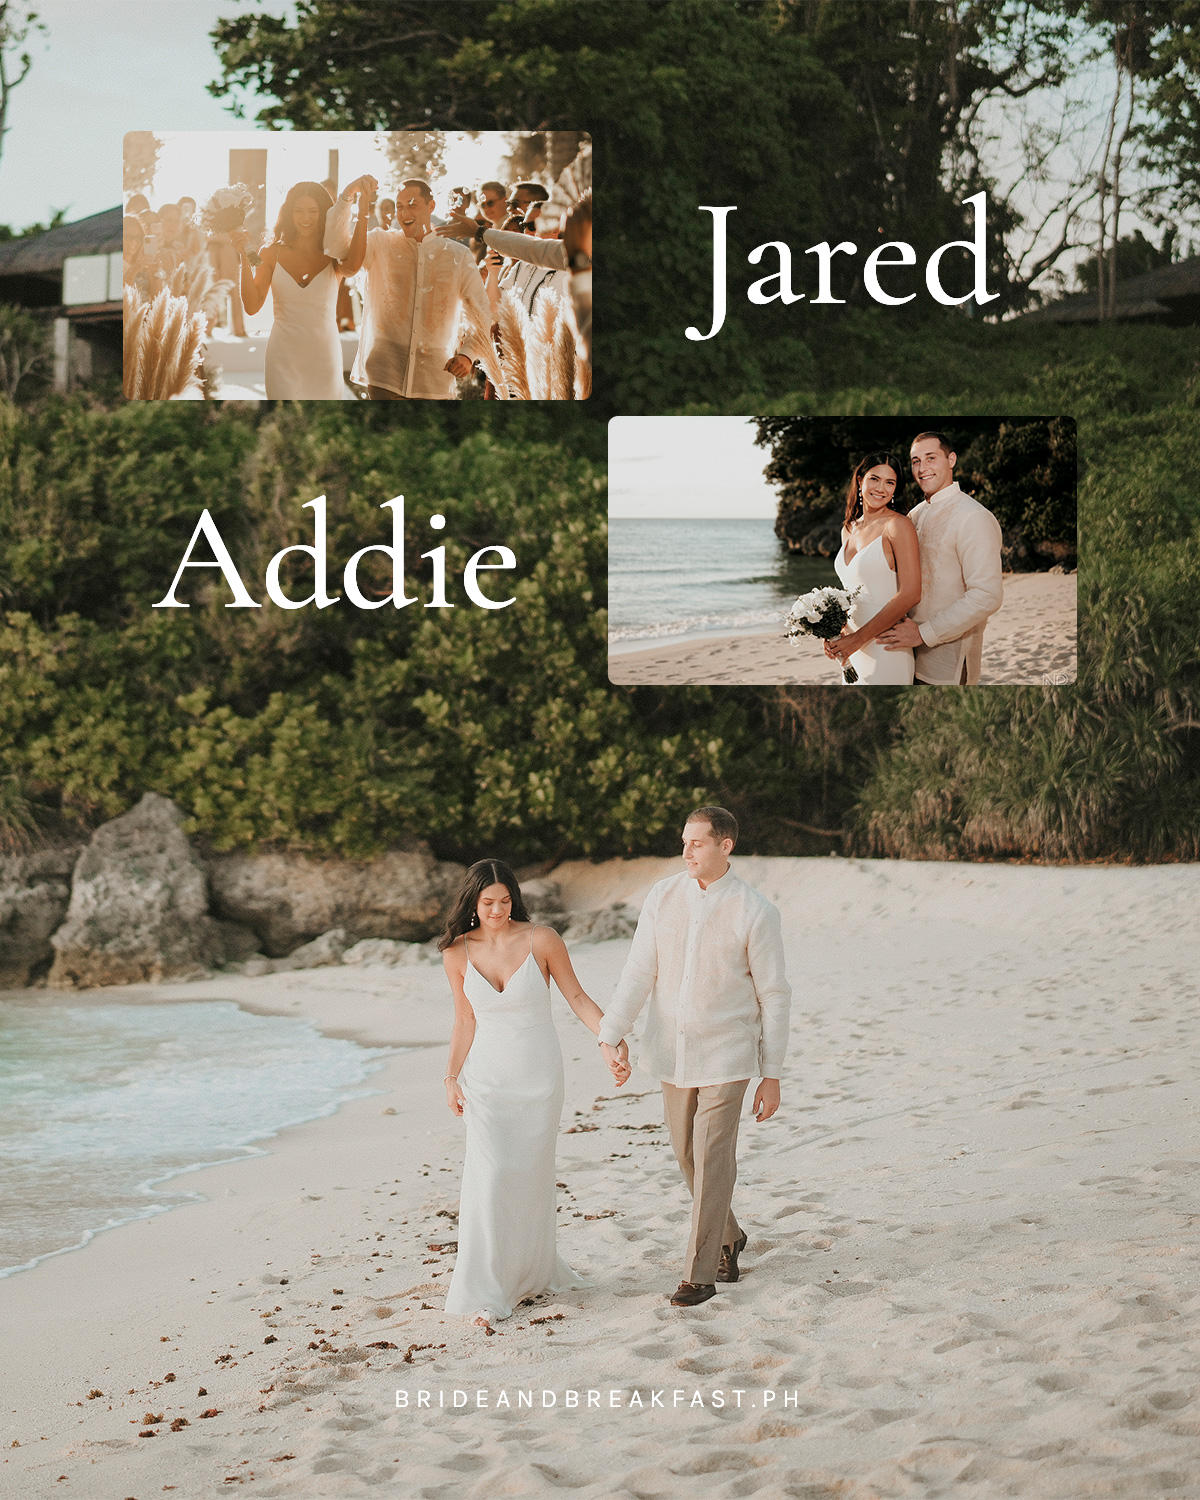 Jared and Addie